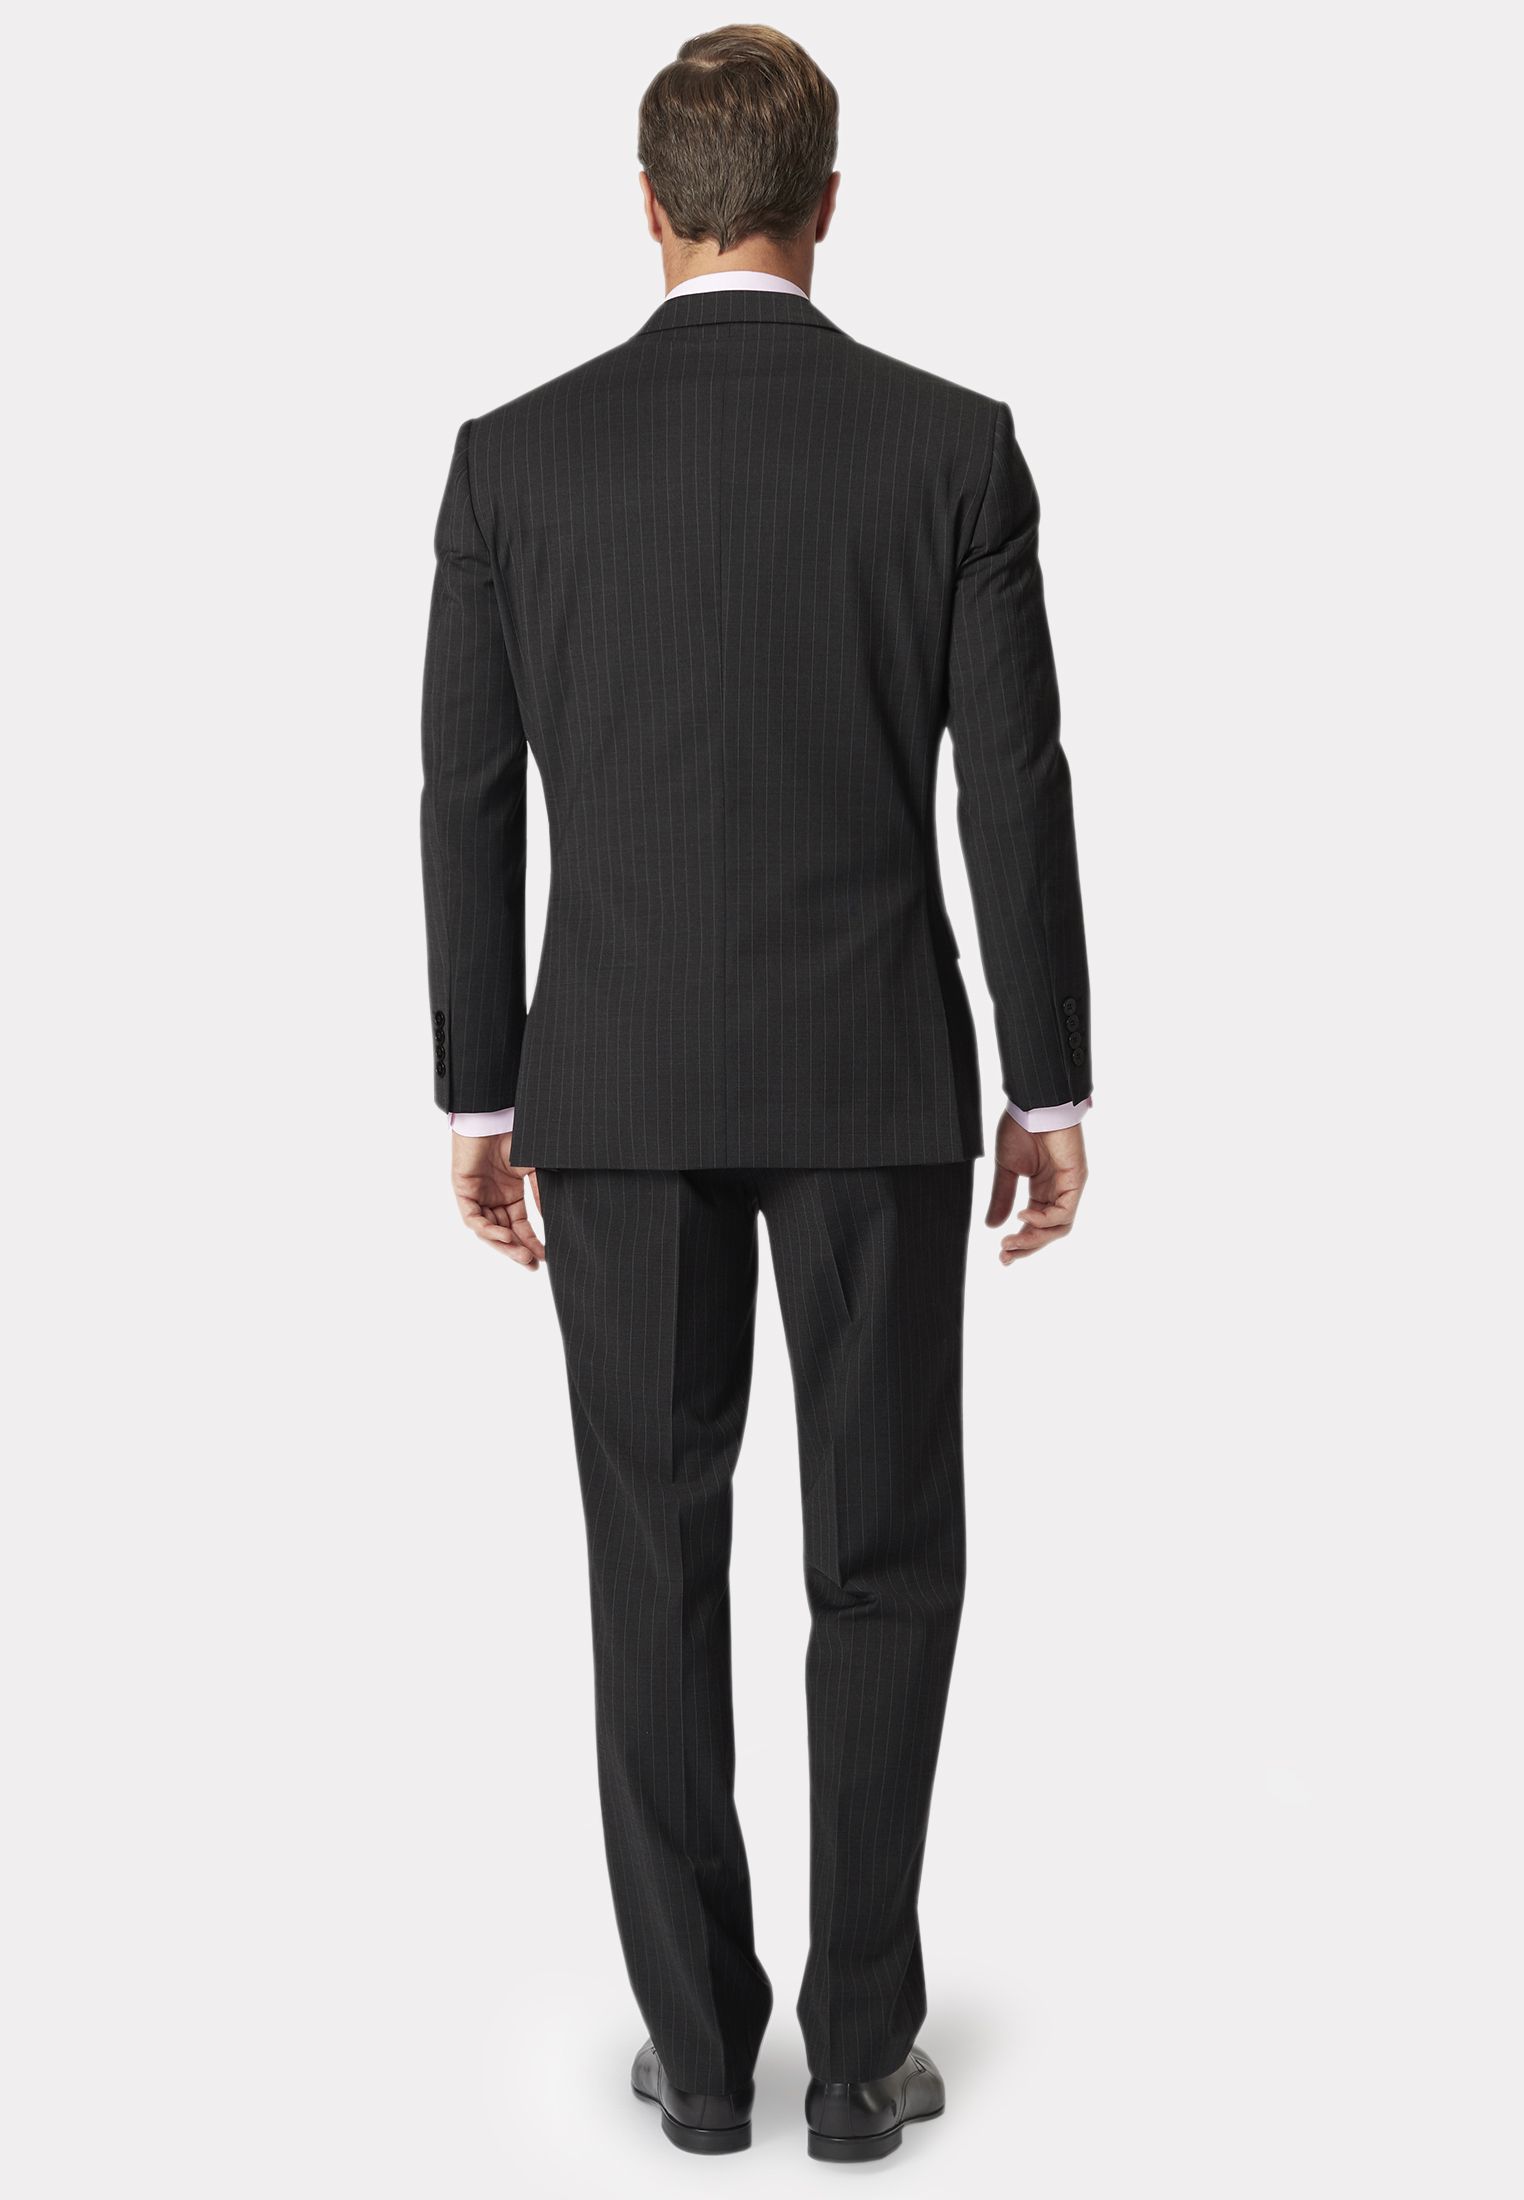 Tailored Fit Charcoal Pinstripe Suit - Waistcoat Optional